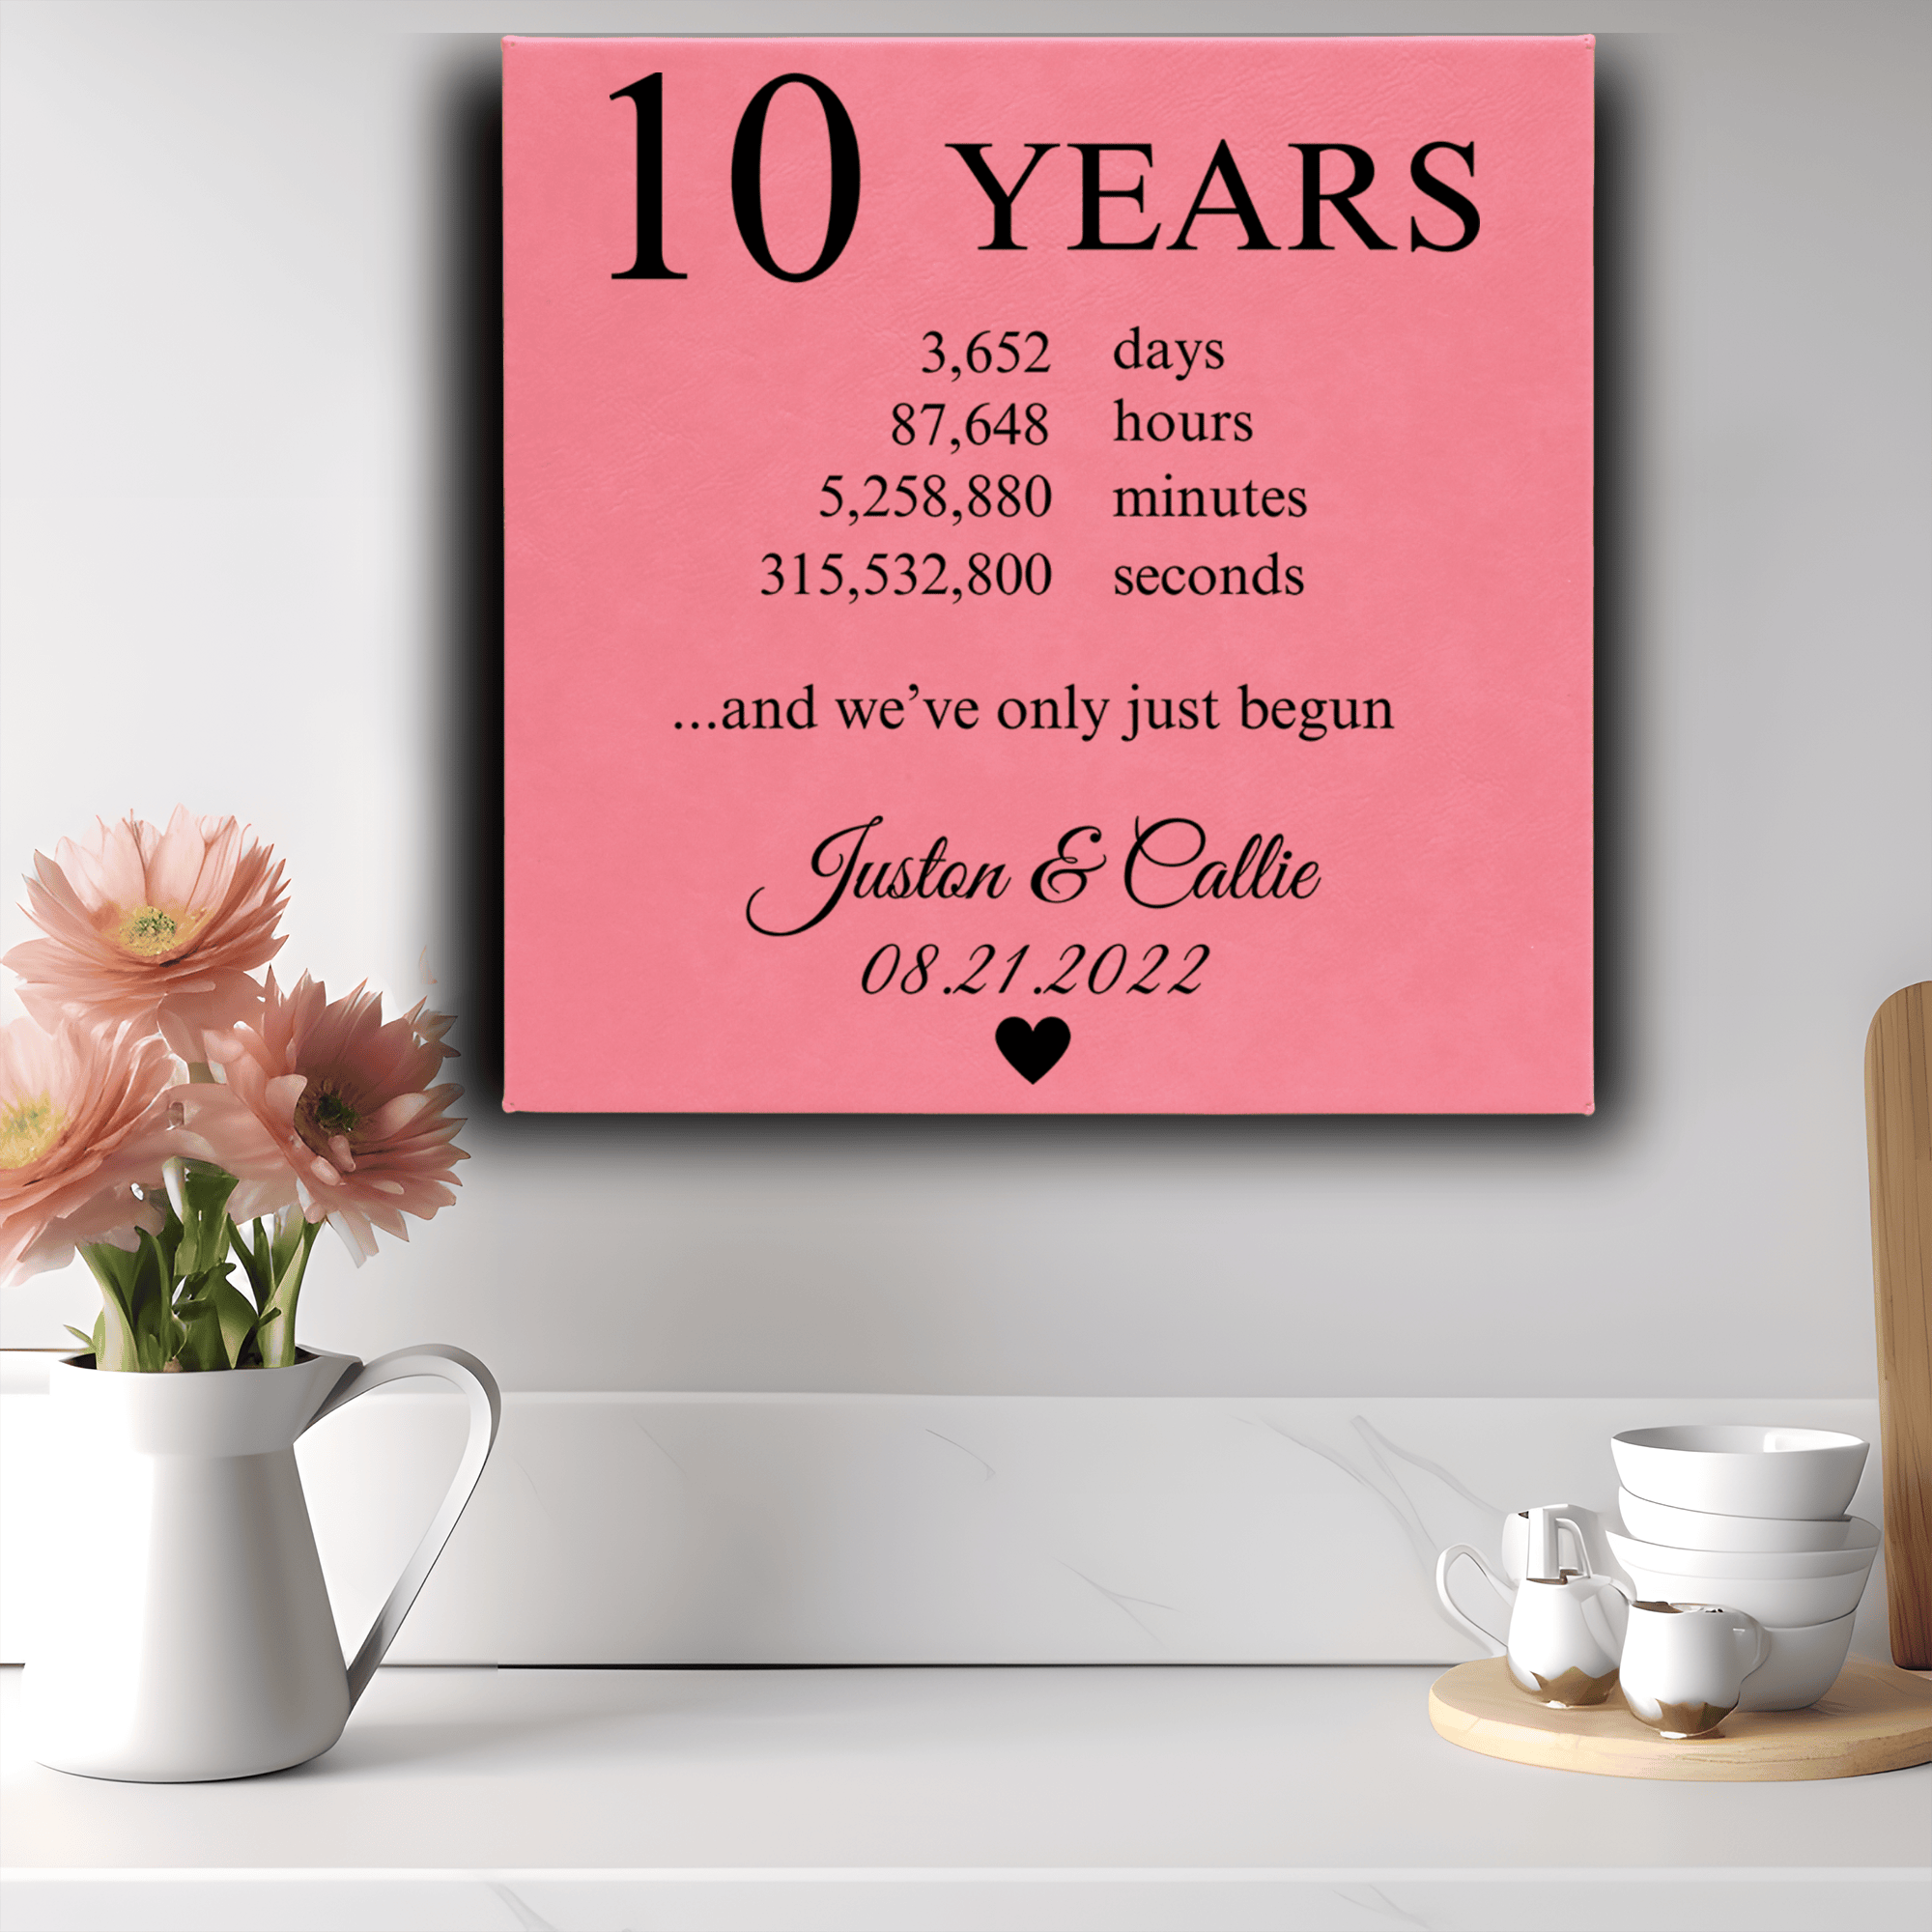 Pink Leather Wall Decor With 10 Year Anniversary Design